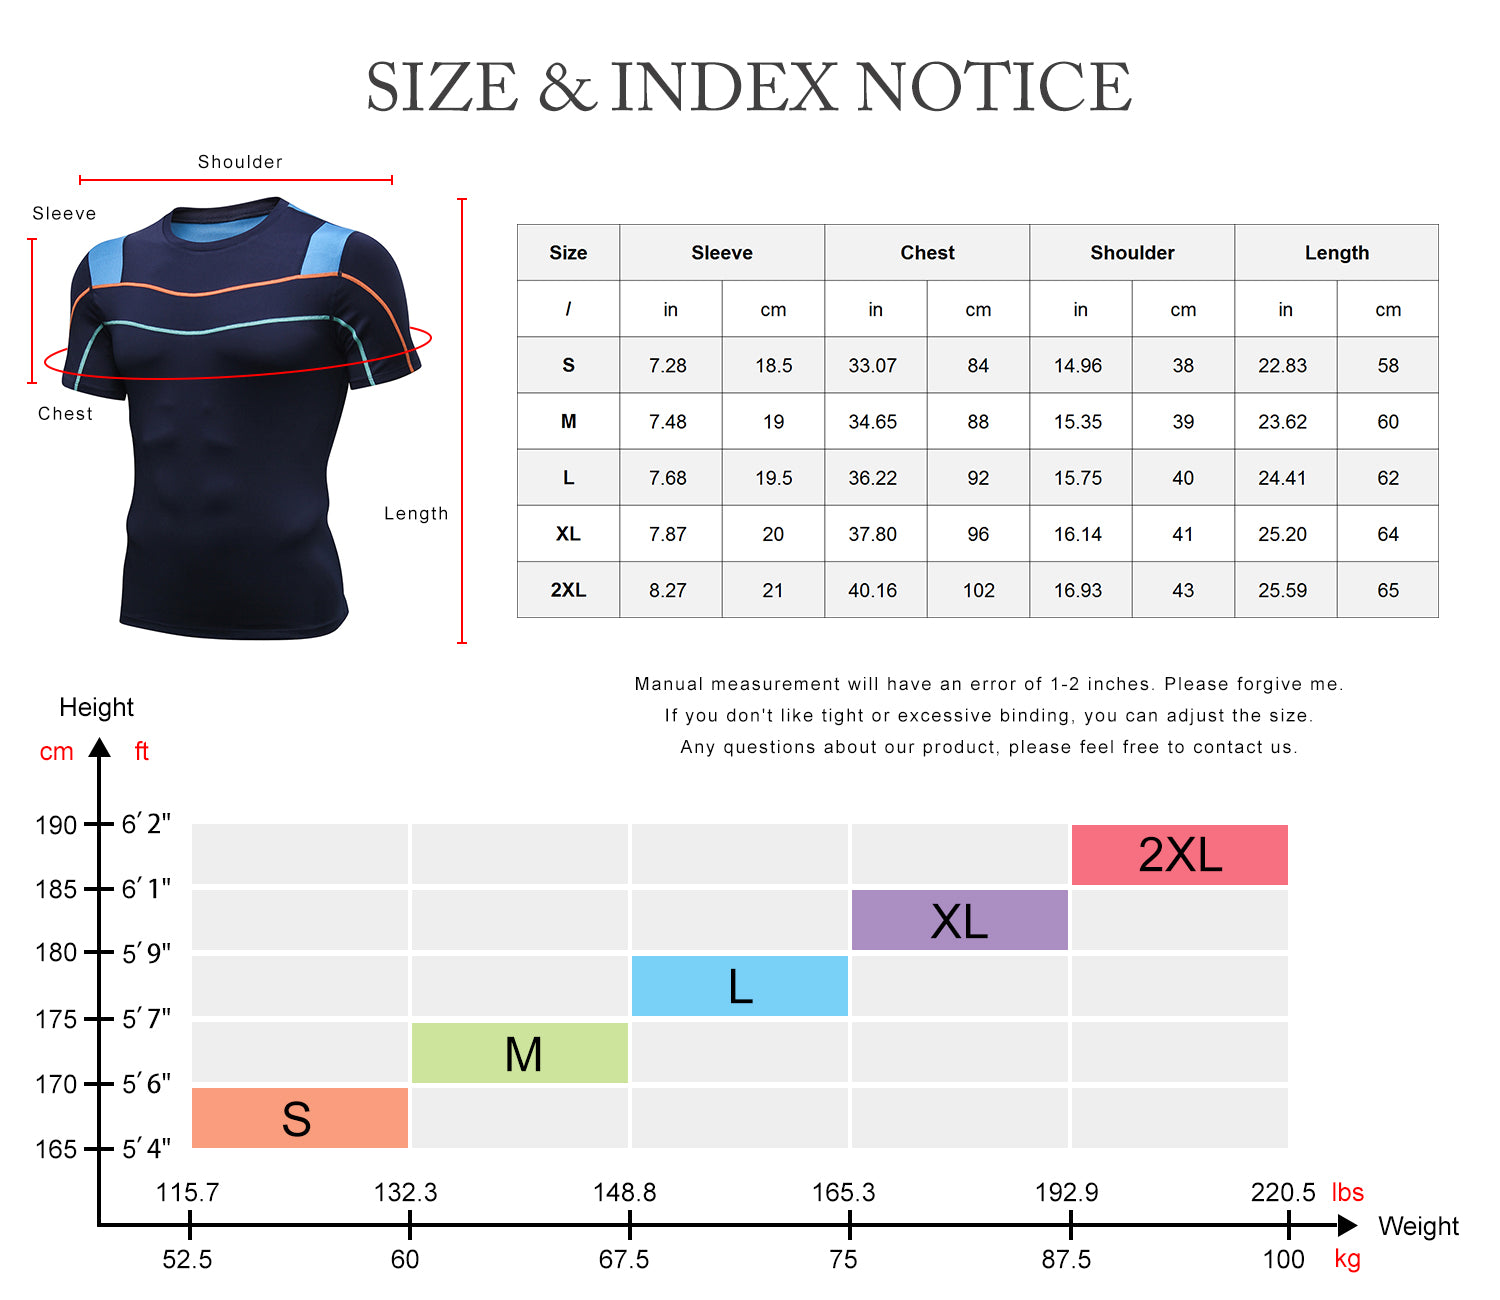 Mens Compression Short Sleeve Shirts Sports Workout Athletic Active Baselayer Tops Splice Stretch Performance T-shirt LANBAOSI